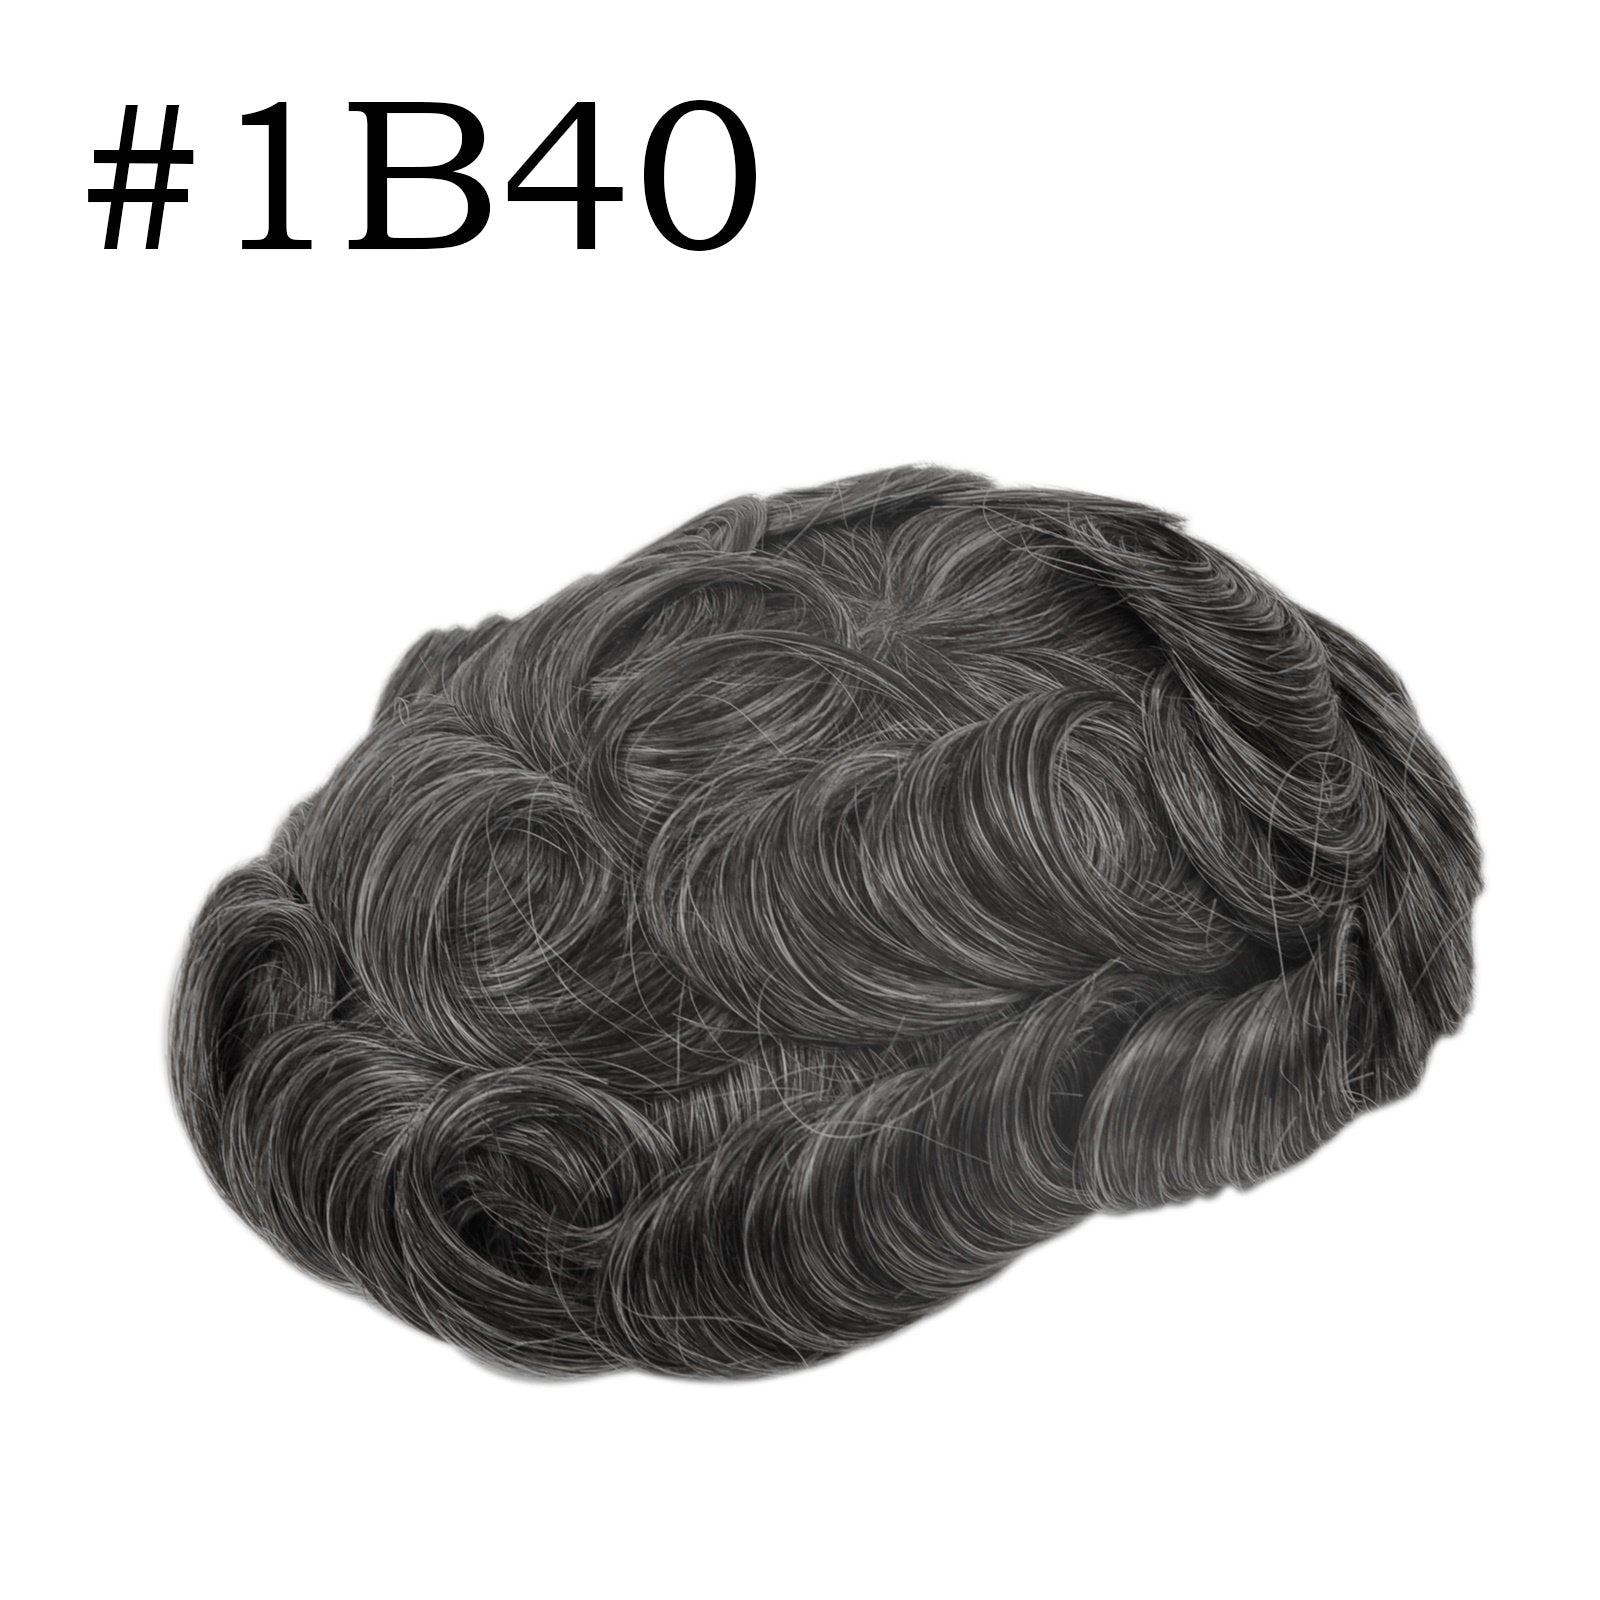 GEXWIGS Q6 Mens Toupee French Lace Base with Thin Skin Hairpieces | Q6.